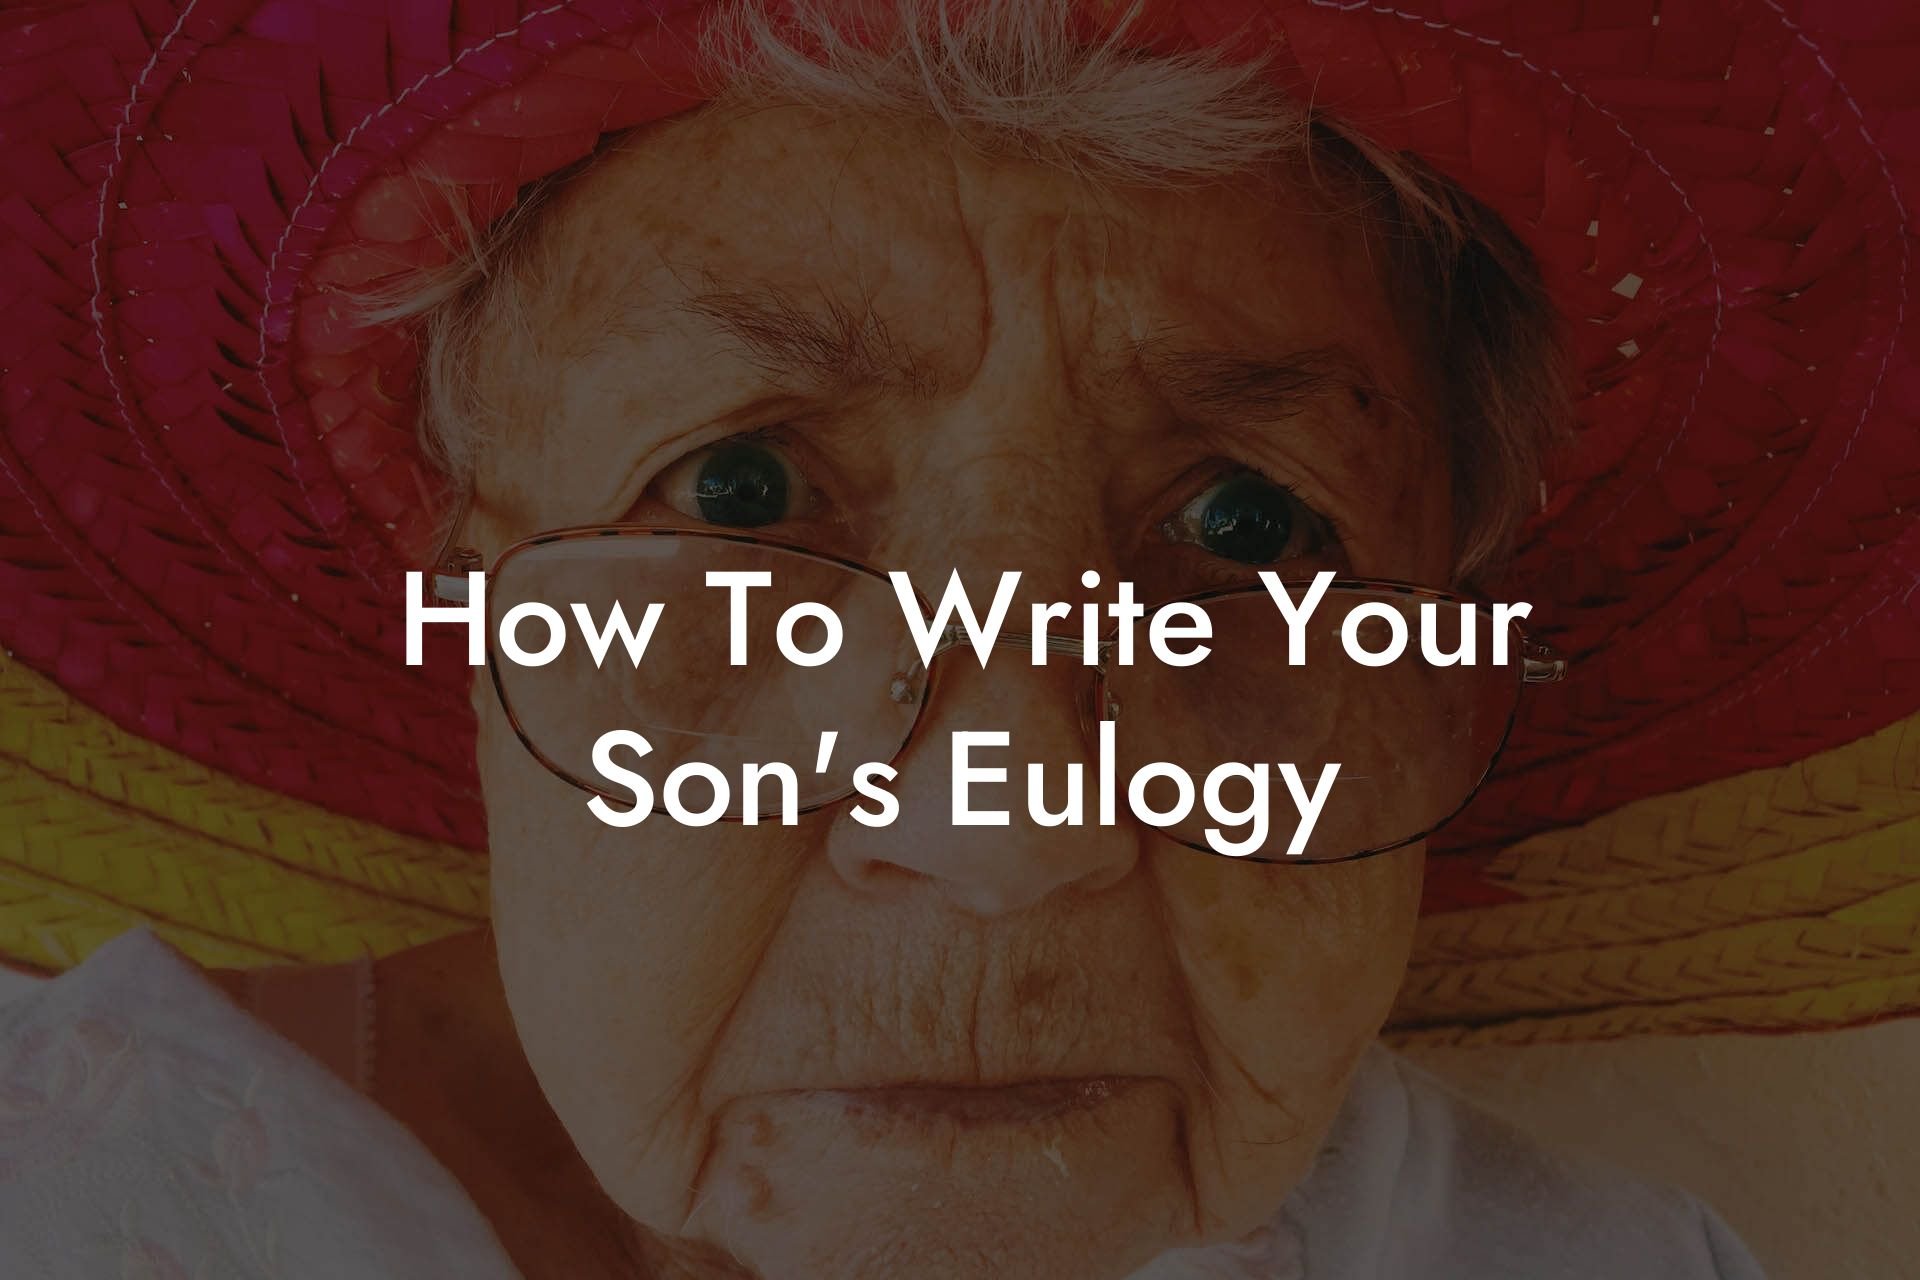 How To Write Your Son's Eulogy